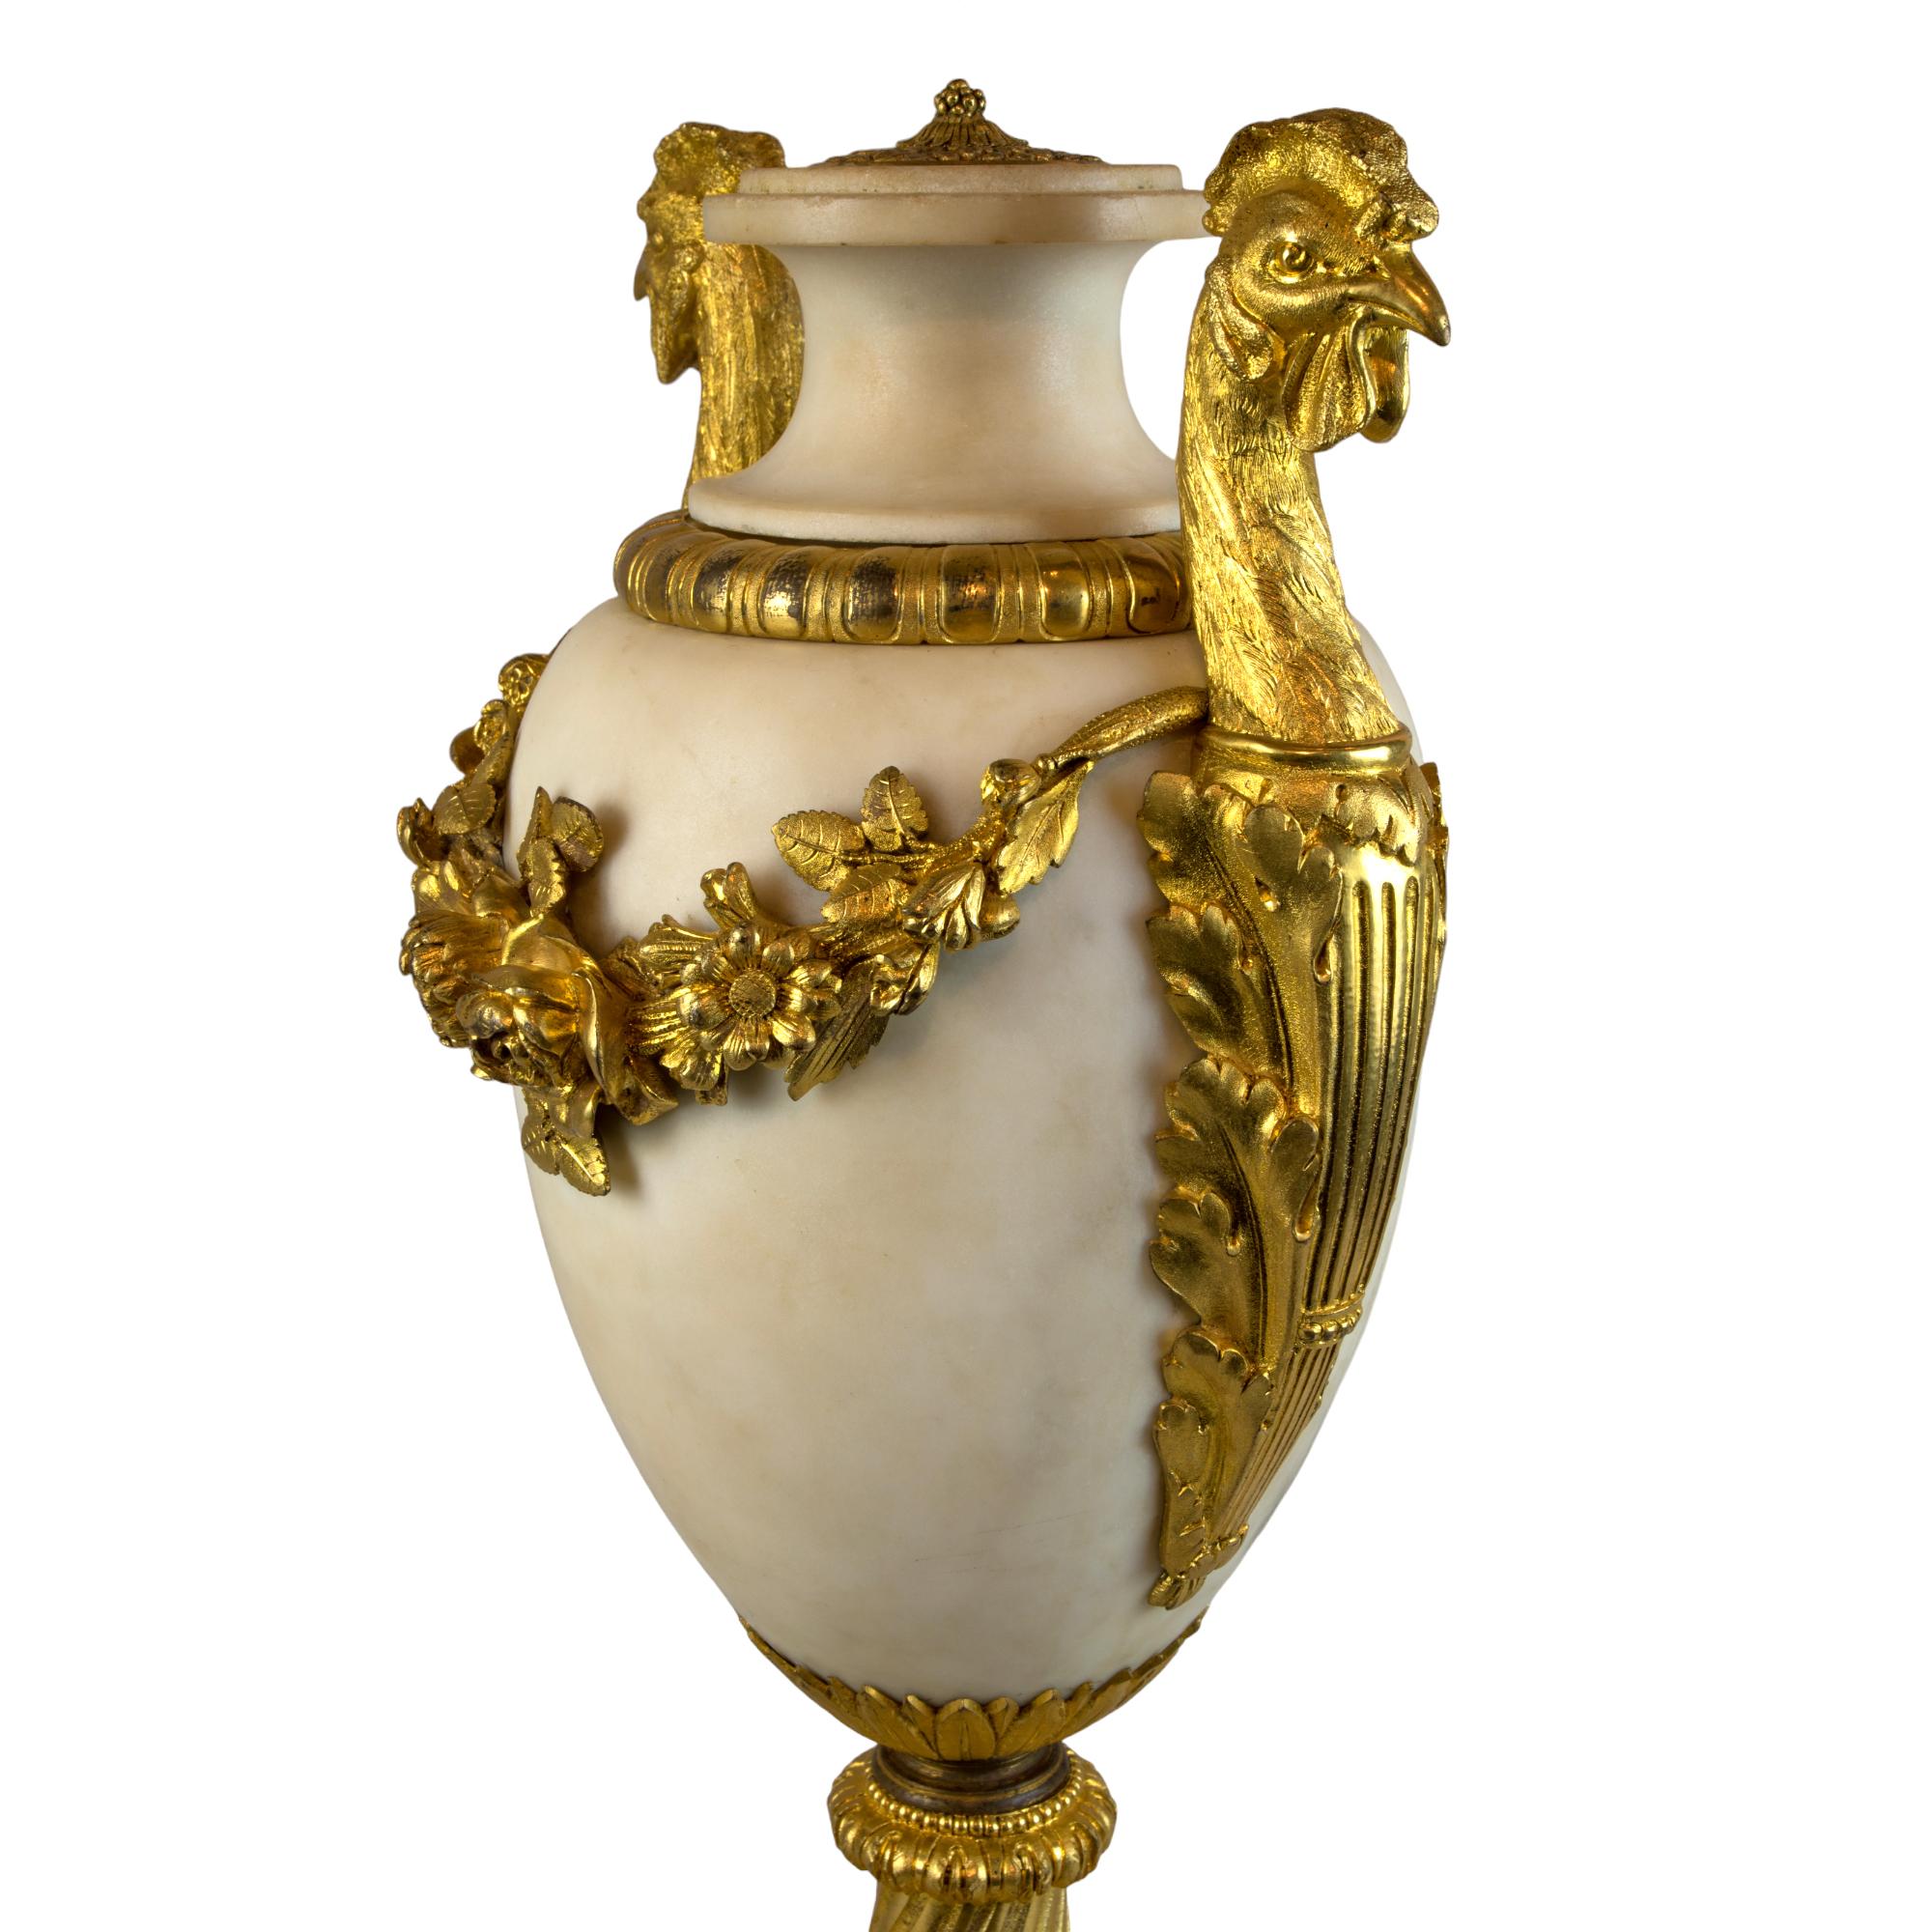 Magnificent Pair of Louis XVI Style Gilt-Bronze-Mounted White Marble Urns For Sale 2